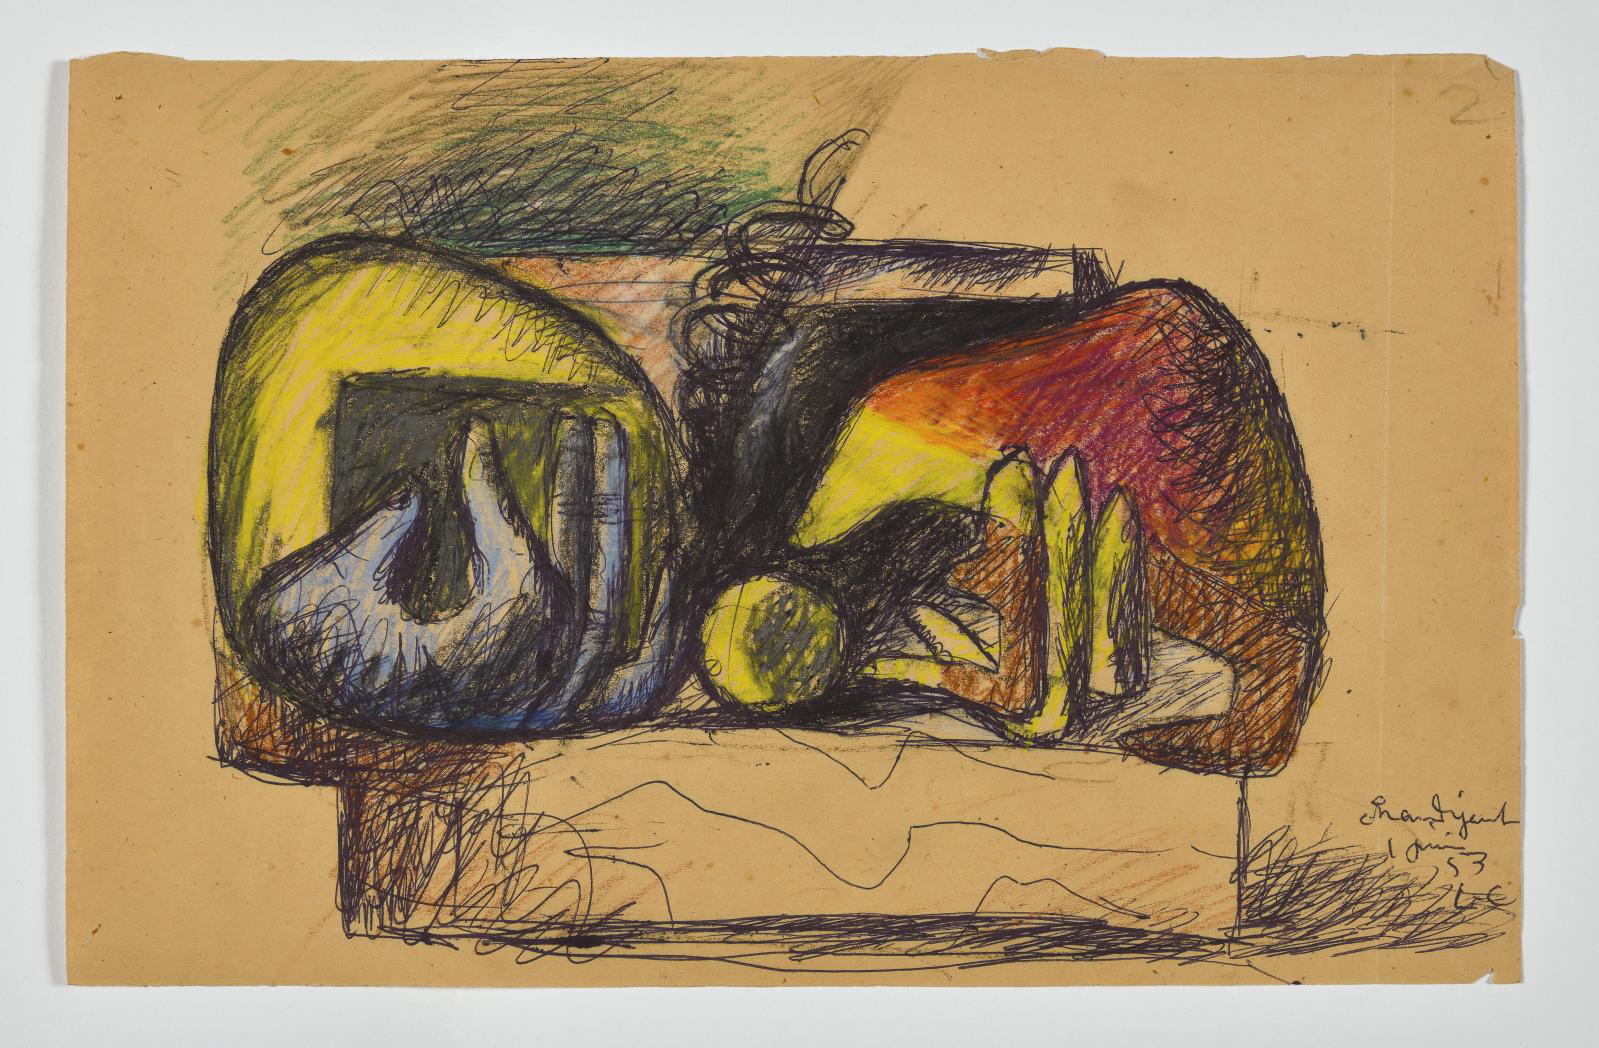 Le Corbusier Drawings: An Auction Debut 